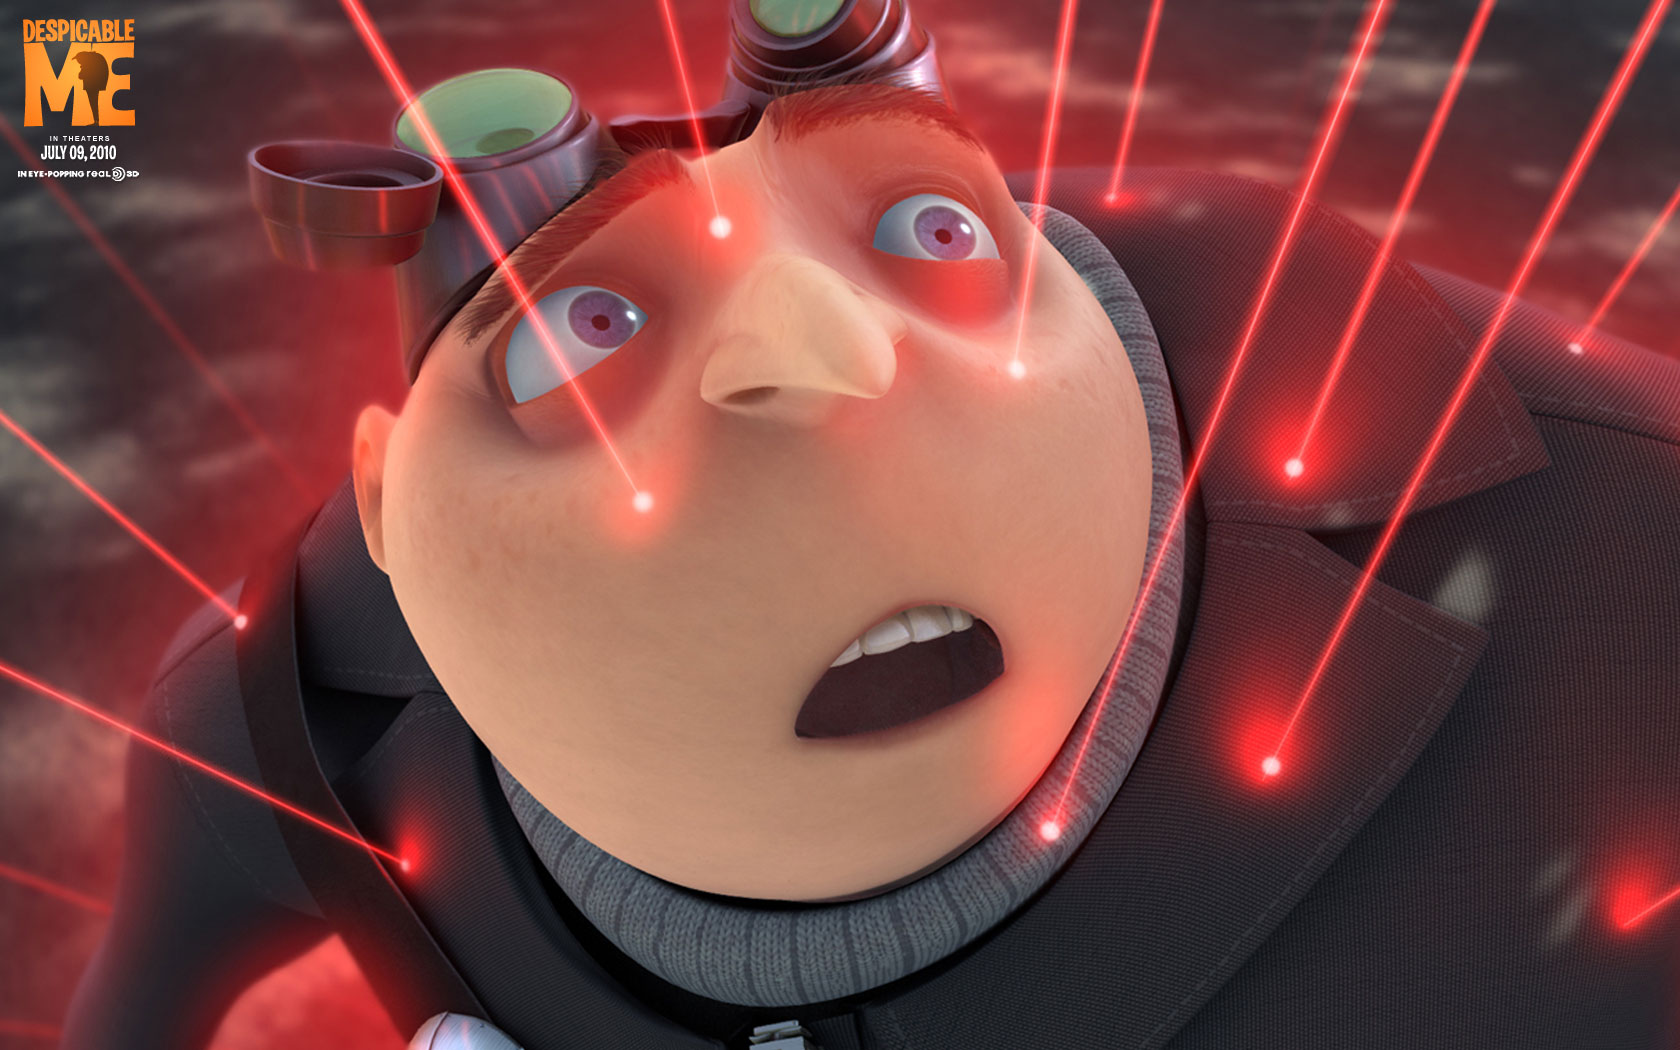 ɵҡdespicable me(ֽ14)